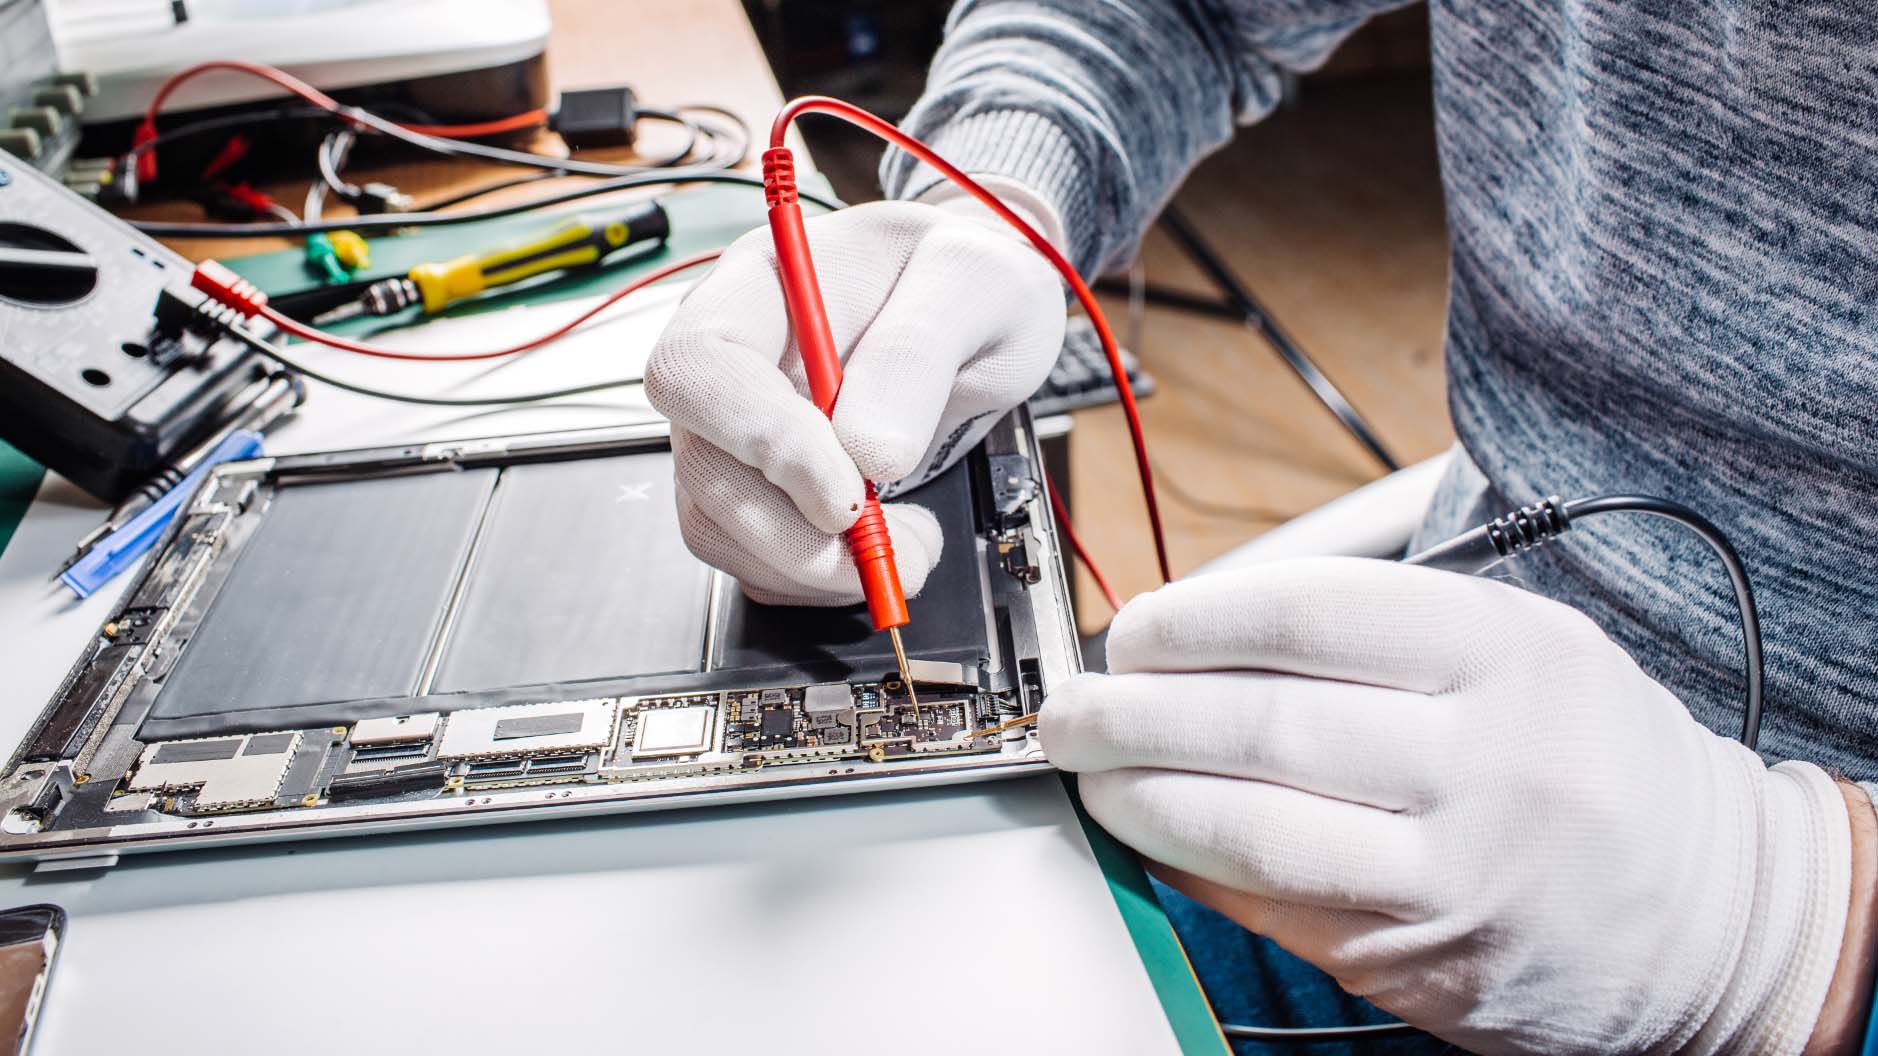 Device repair technicians snoop on your personal data, remove their tracks: report